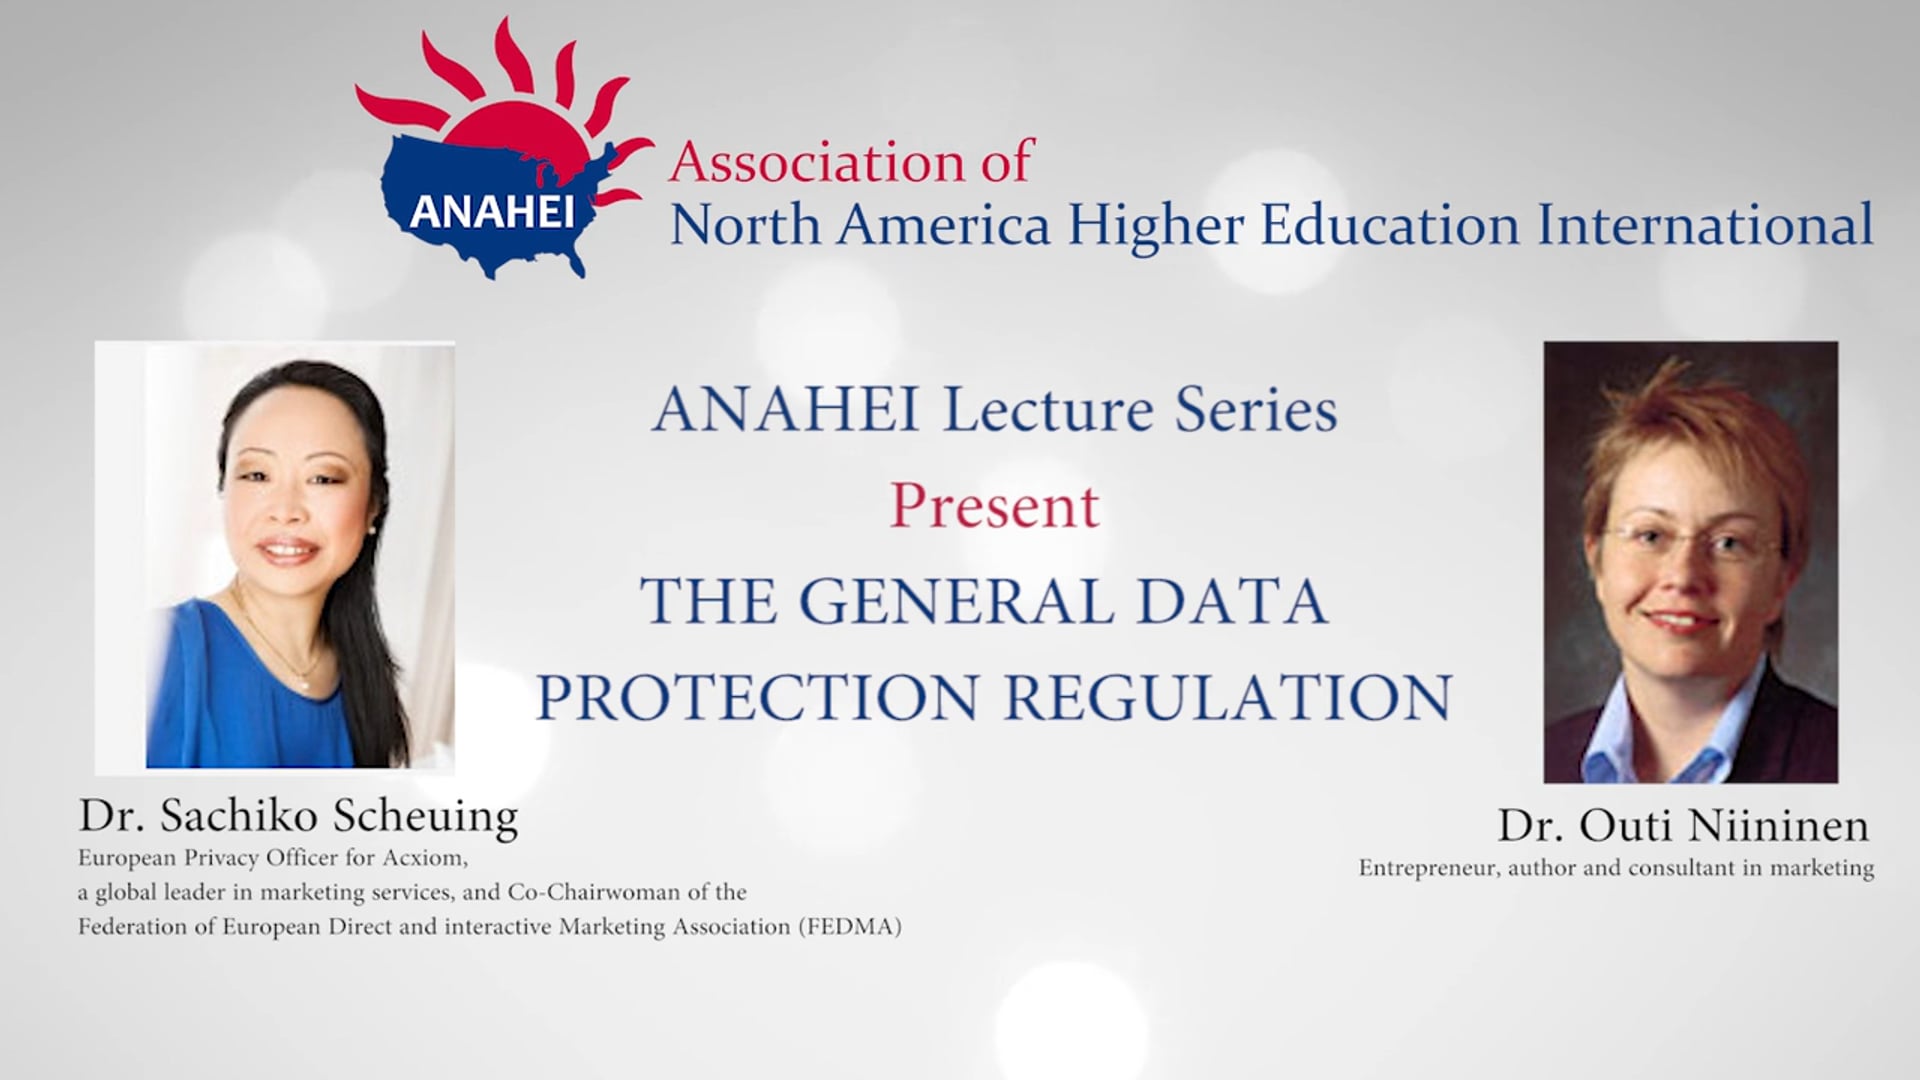 ANAHEI Lecture Series: Dr. Sachiko Scheuing and Dr. Outi Niininen